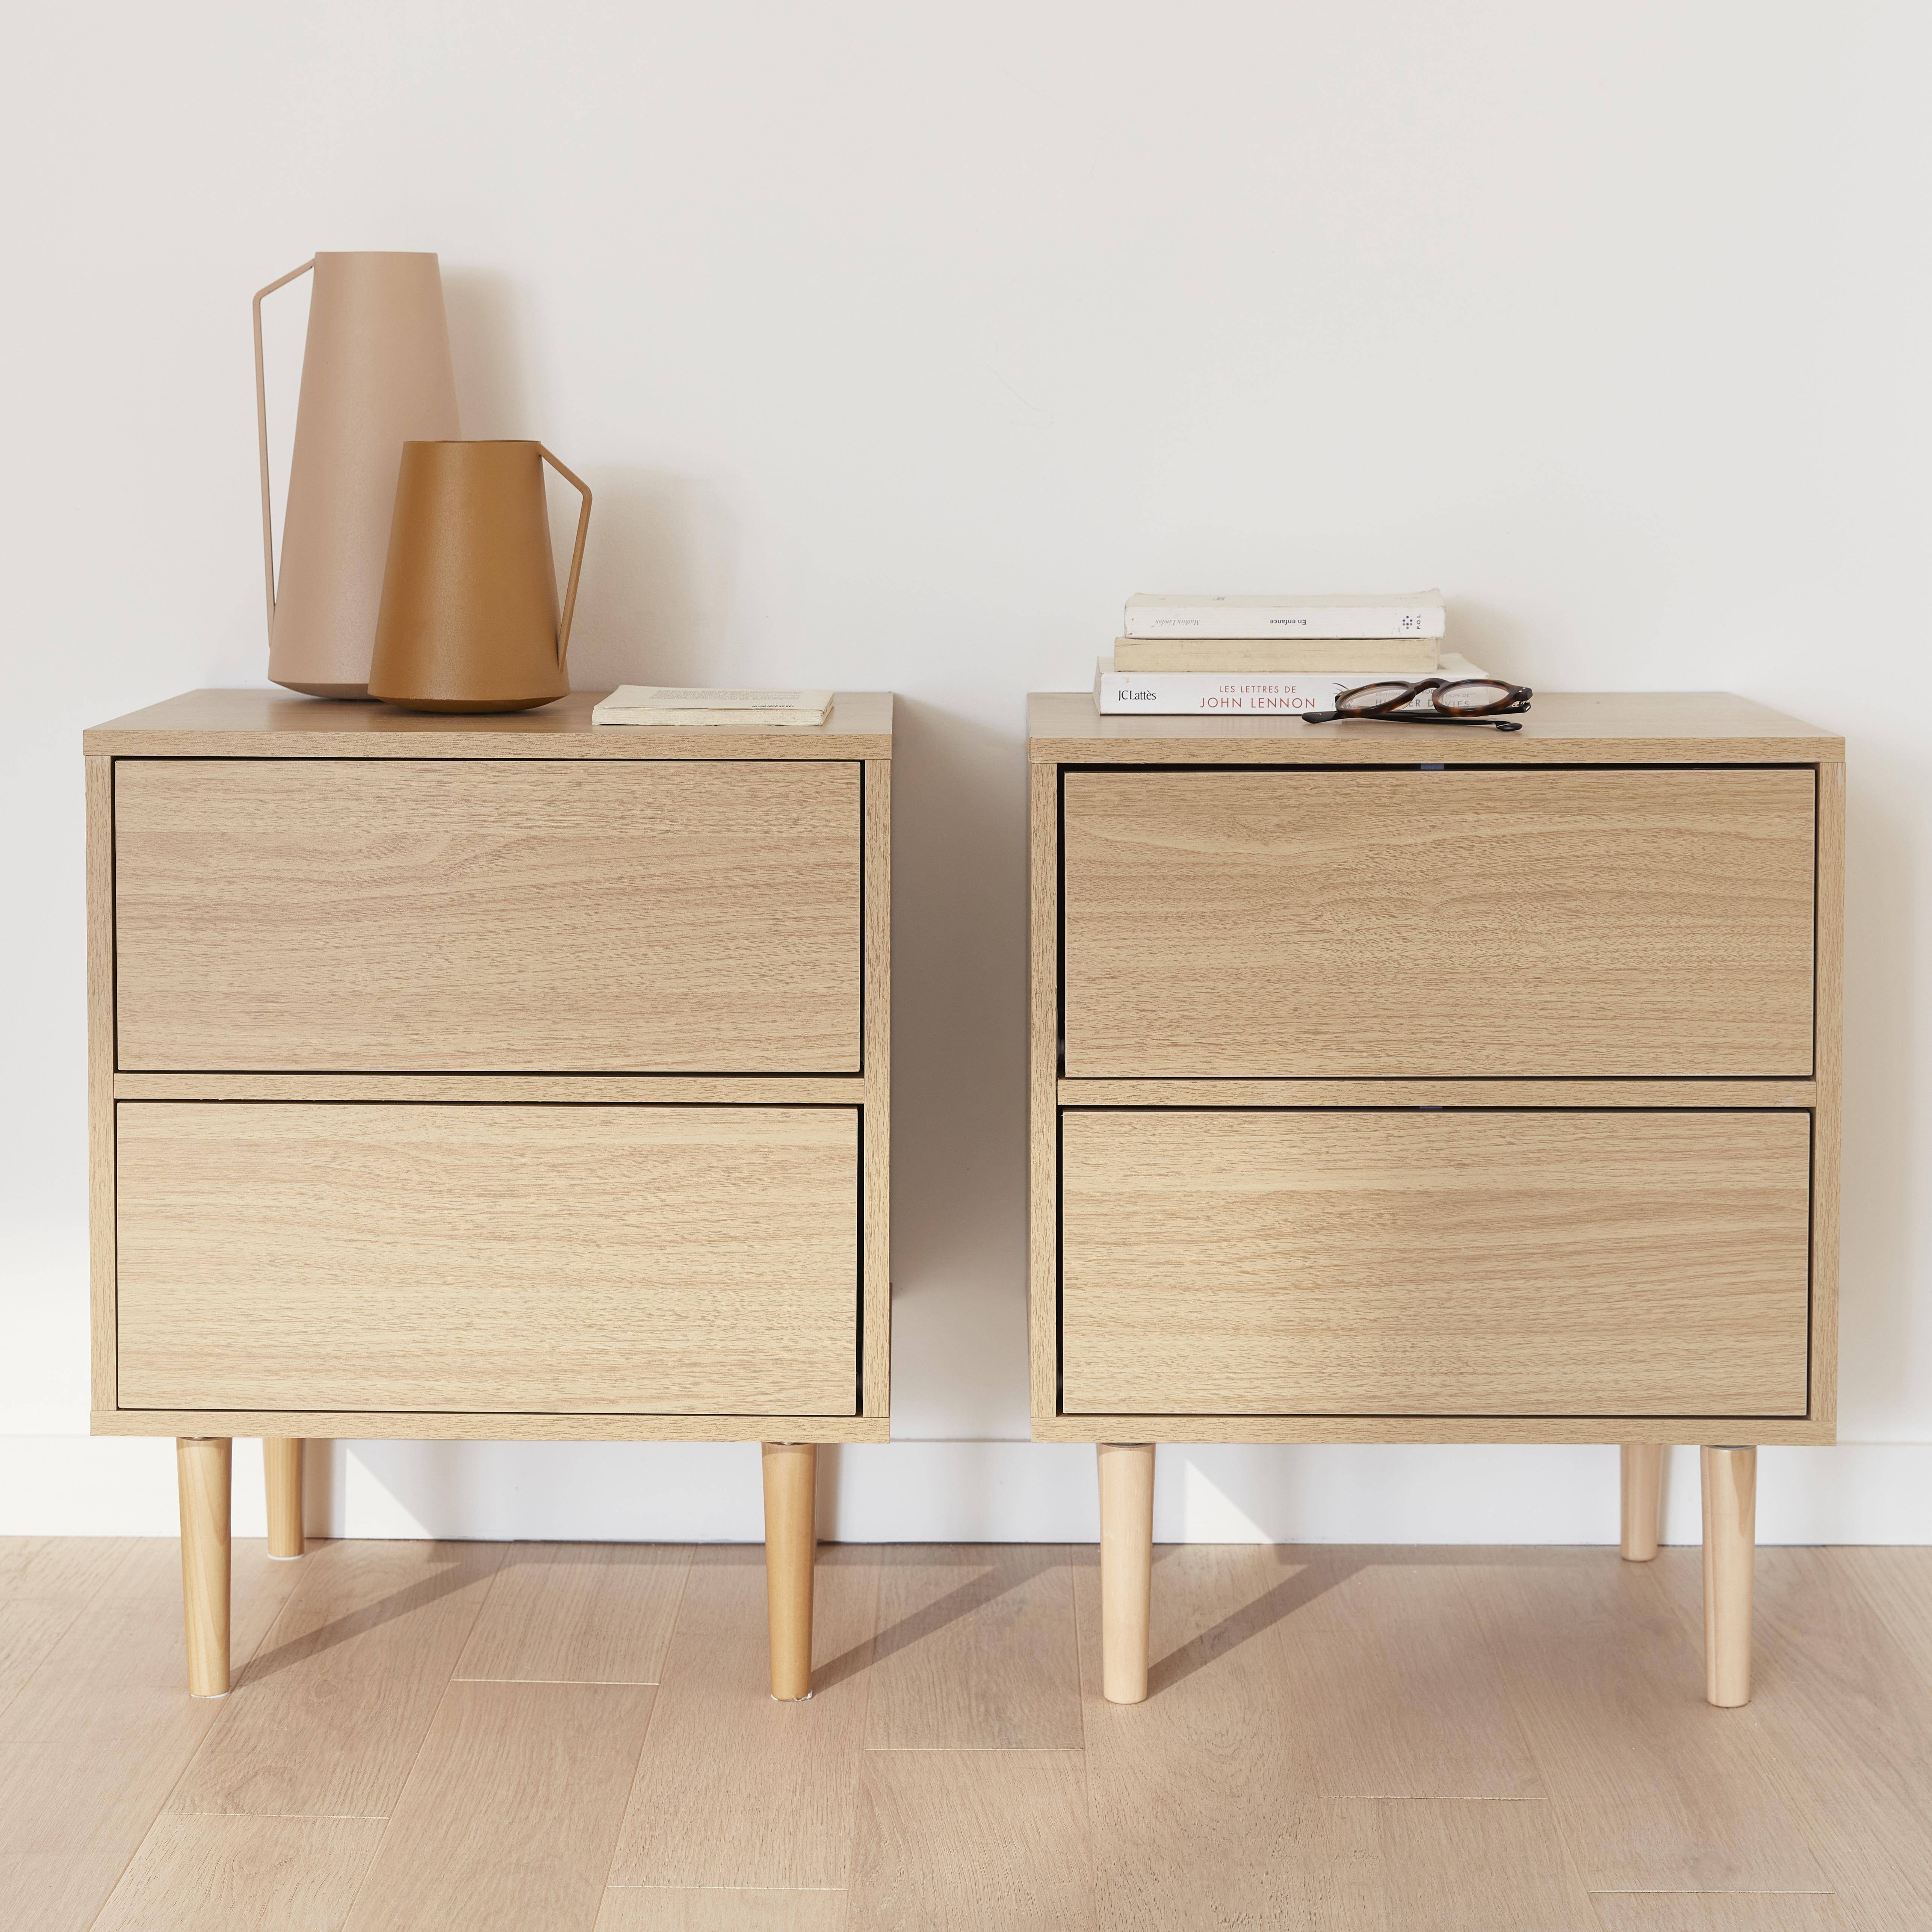 Pair of wood-effect bedside tables with two drawers, 48x40x59cm - Mika - Natural Wood Photo1